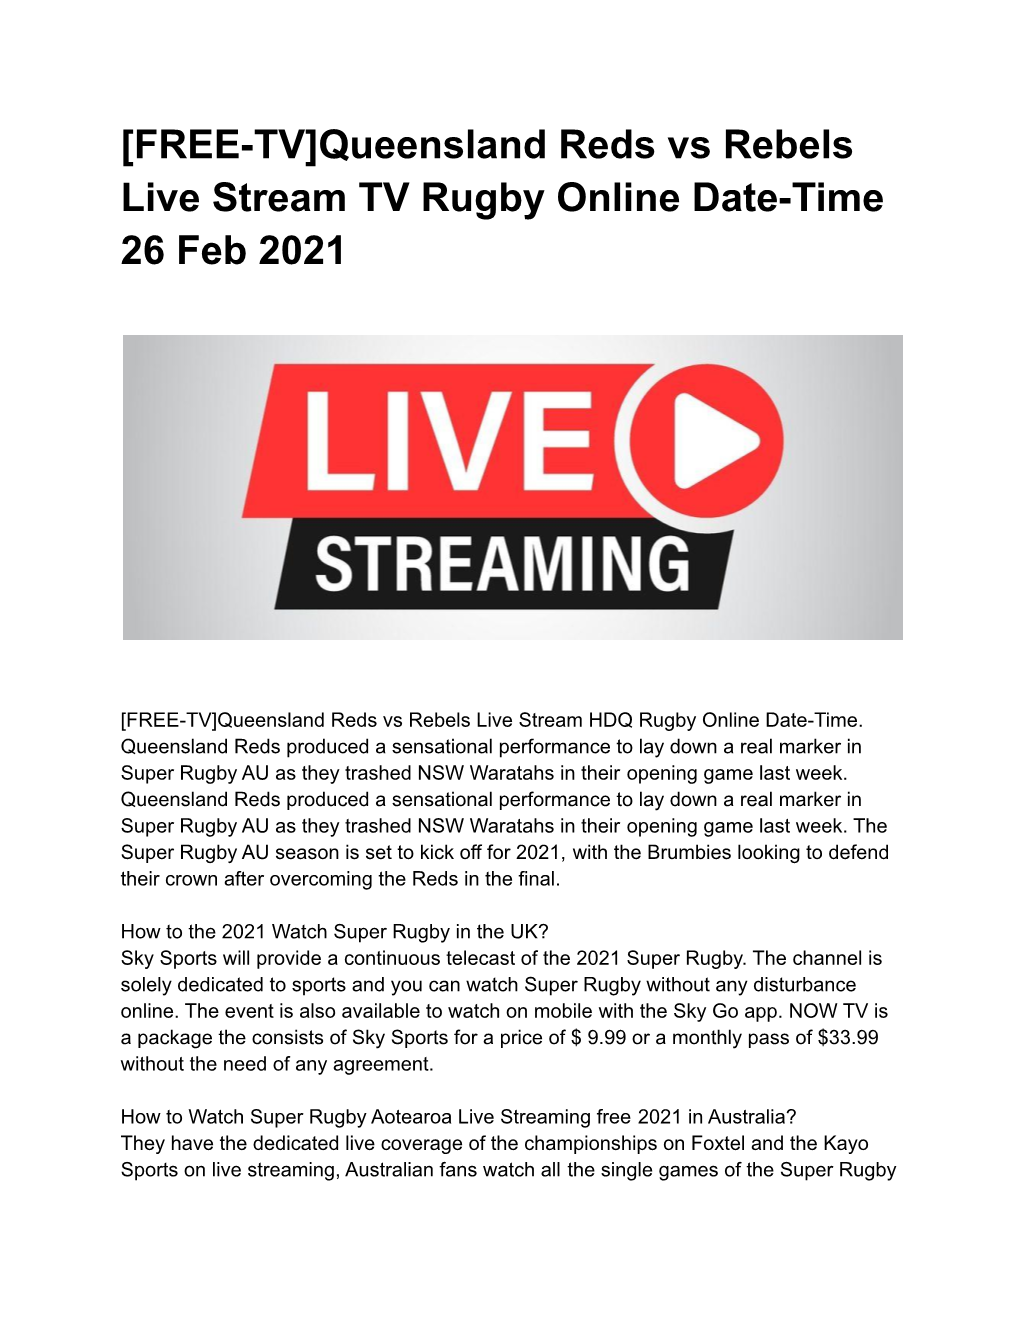 Queensland Reds Vs Rebels Live Stream TV Rugby Online Date-Time 26 Feb 2021